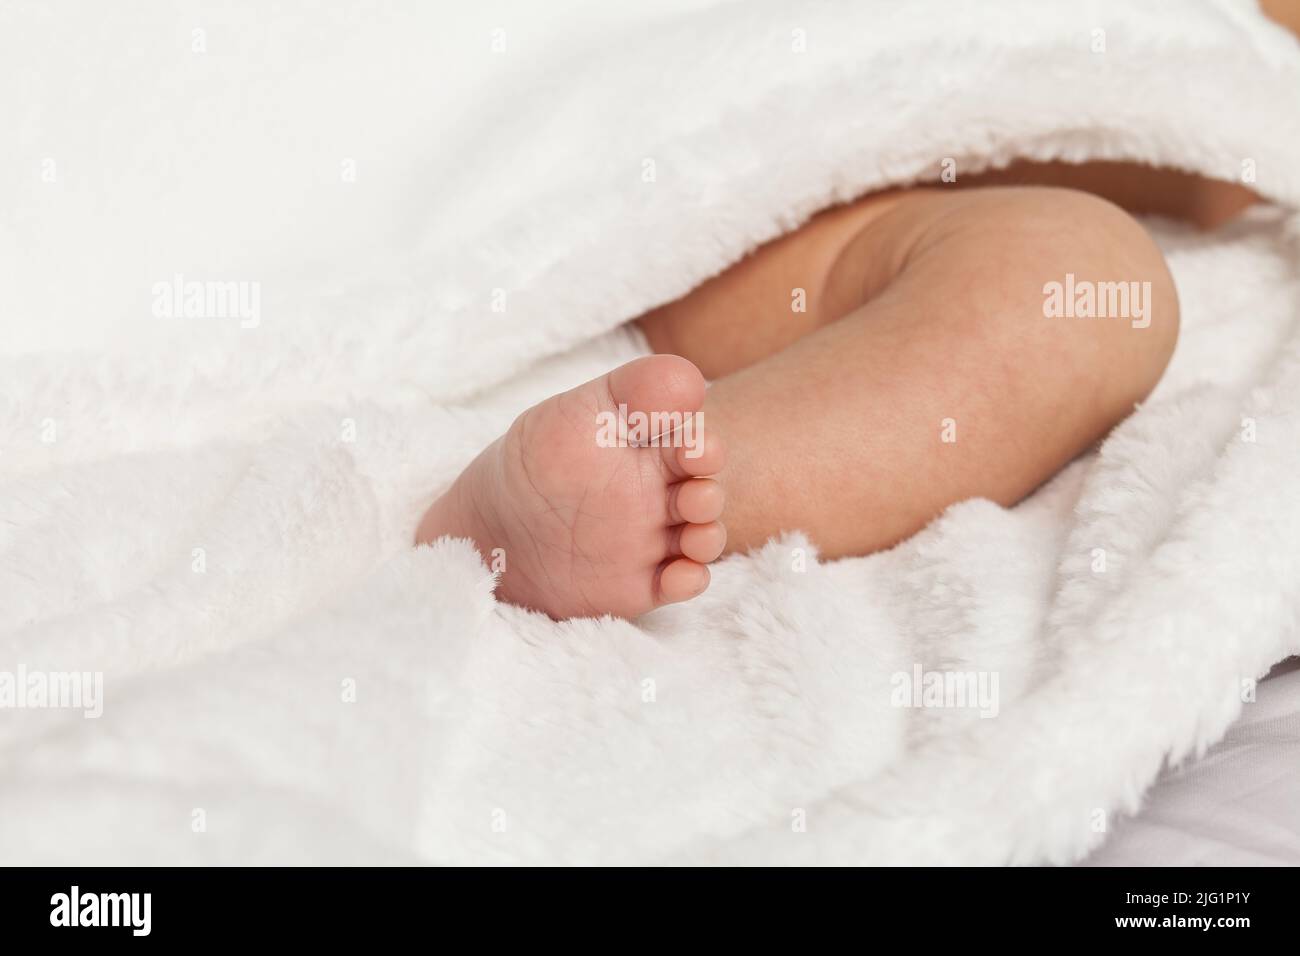 Close-up photo; photo of the foot of a newborn baby. Stock Photo